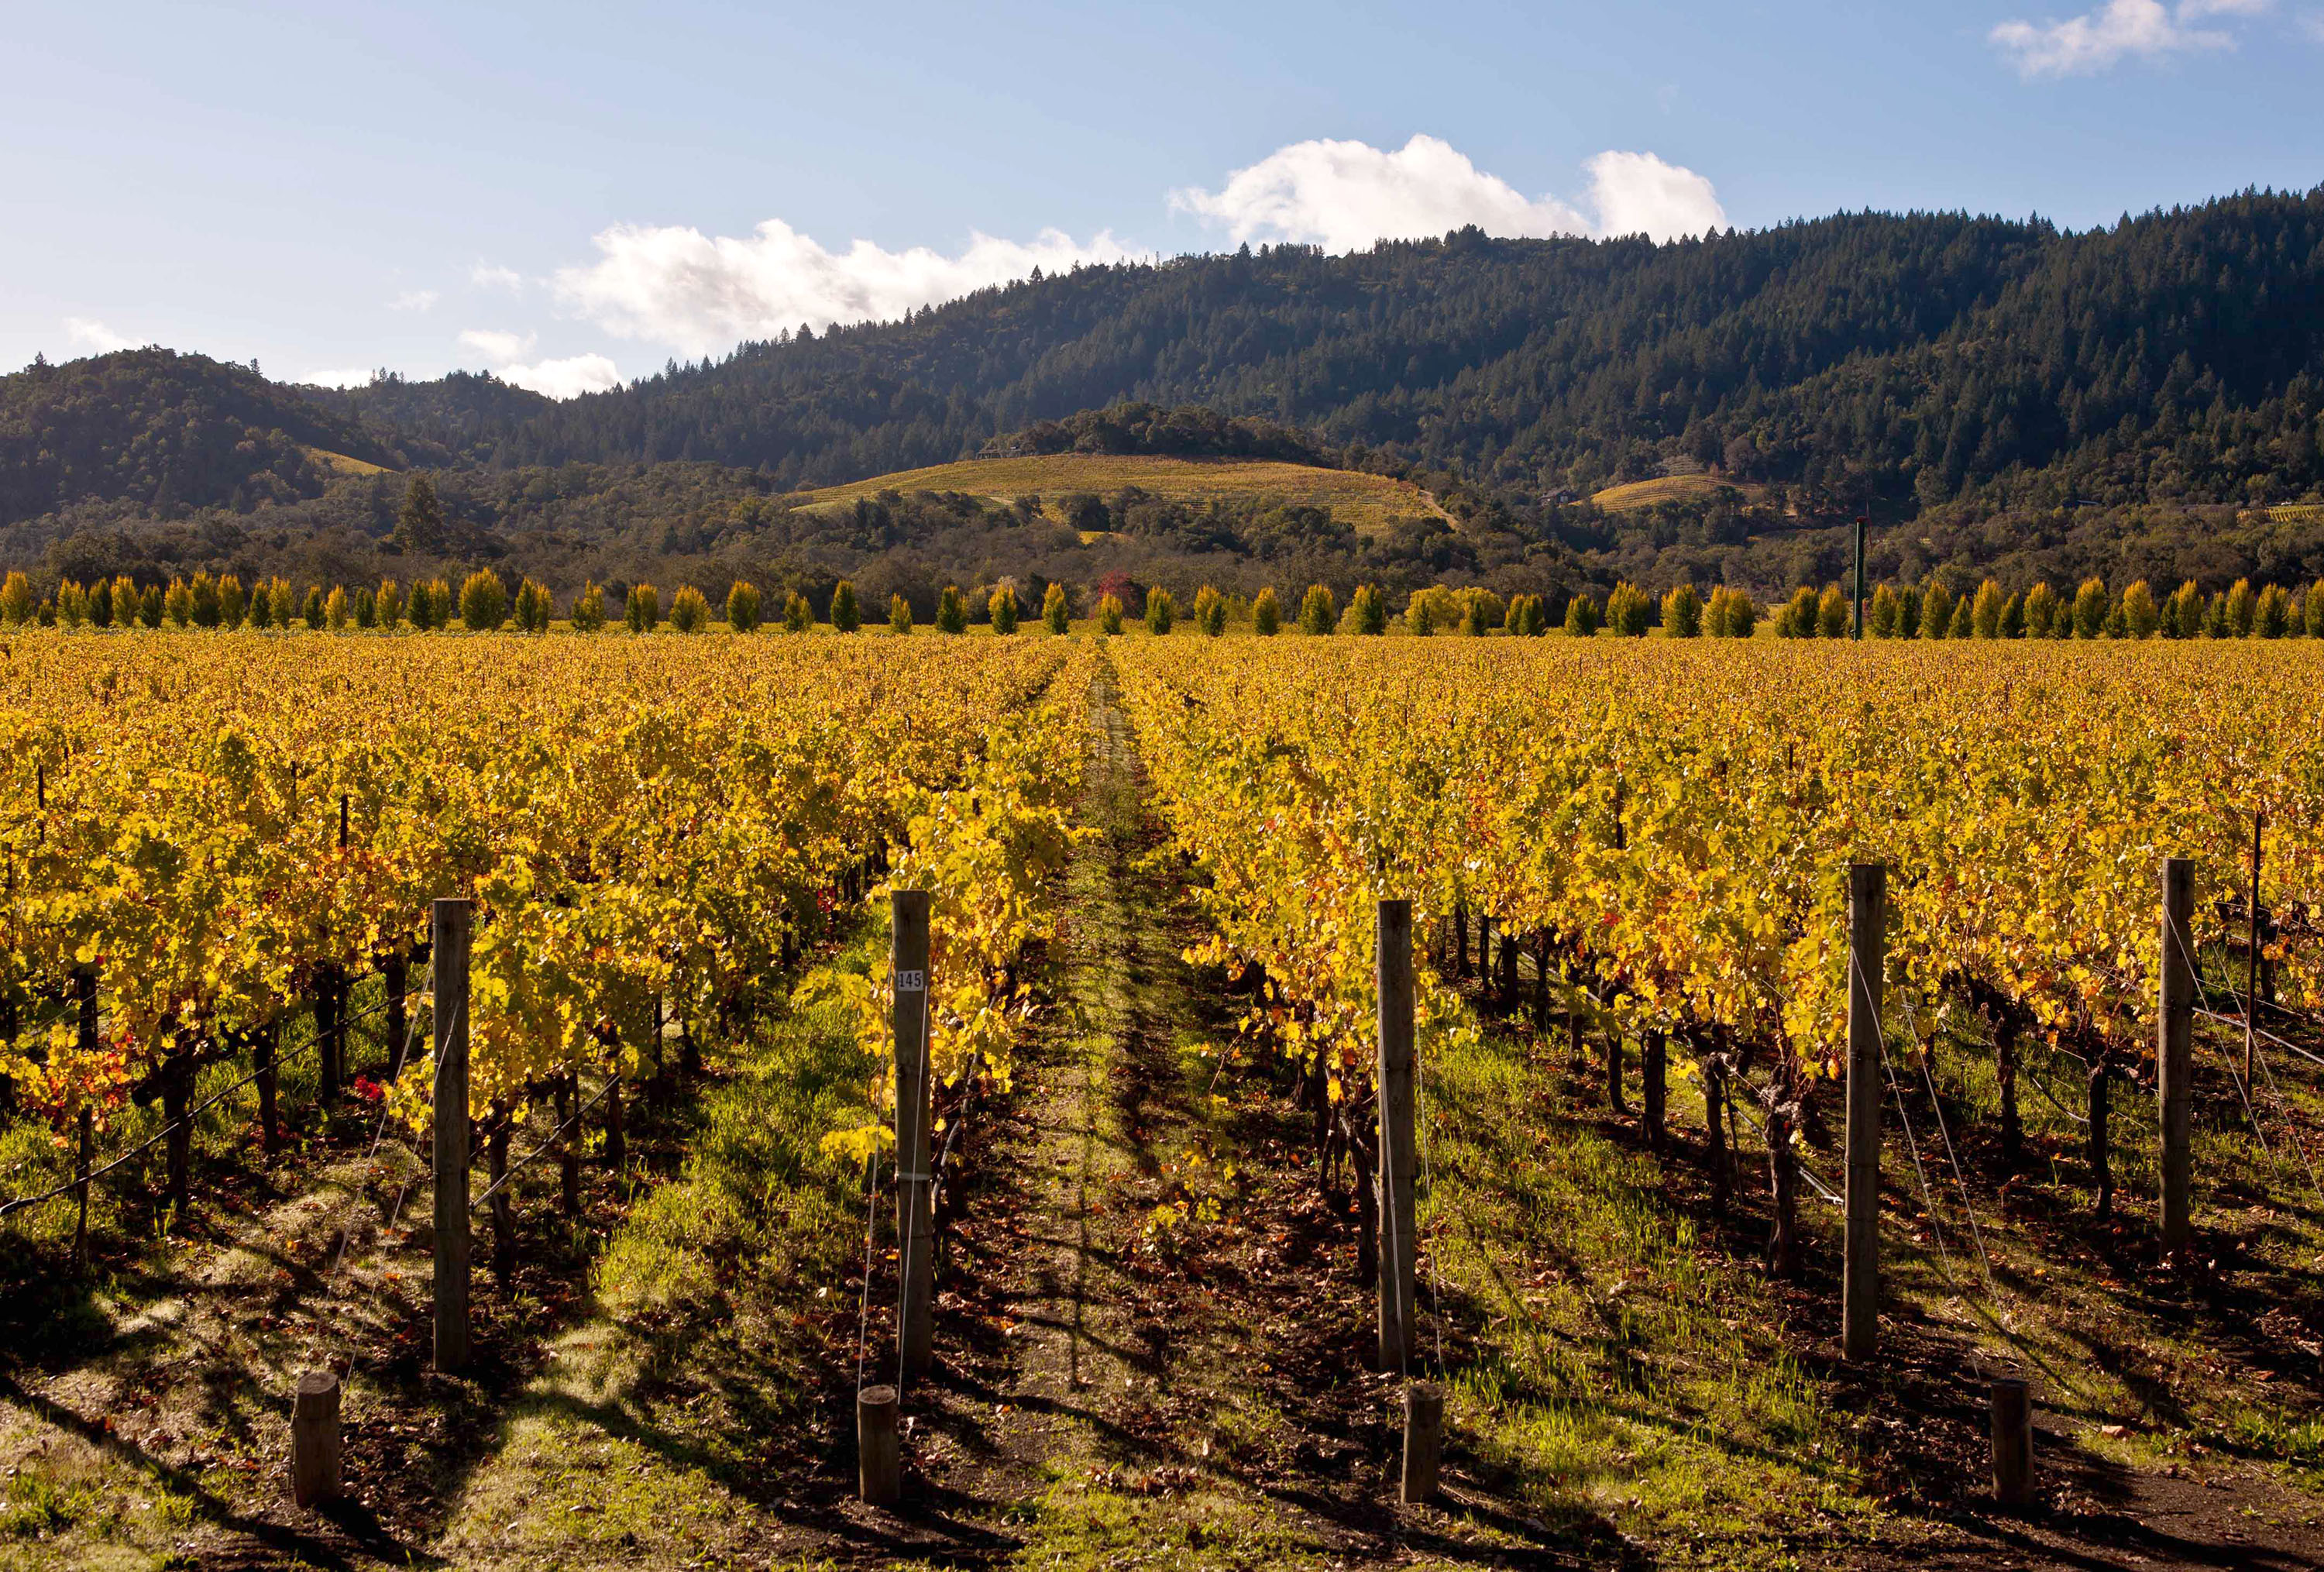 Vineyard in fall, a sea of yellow leaves with hills in the background.